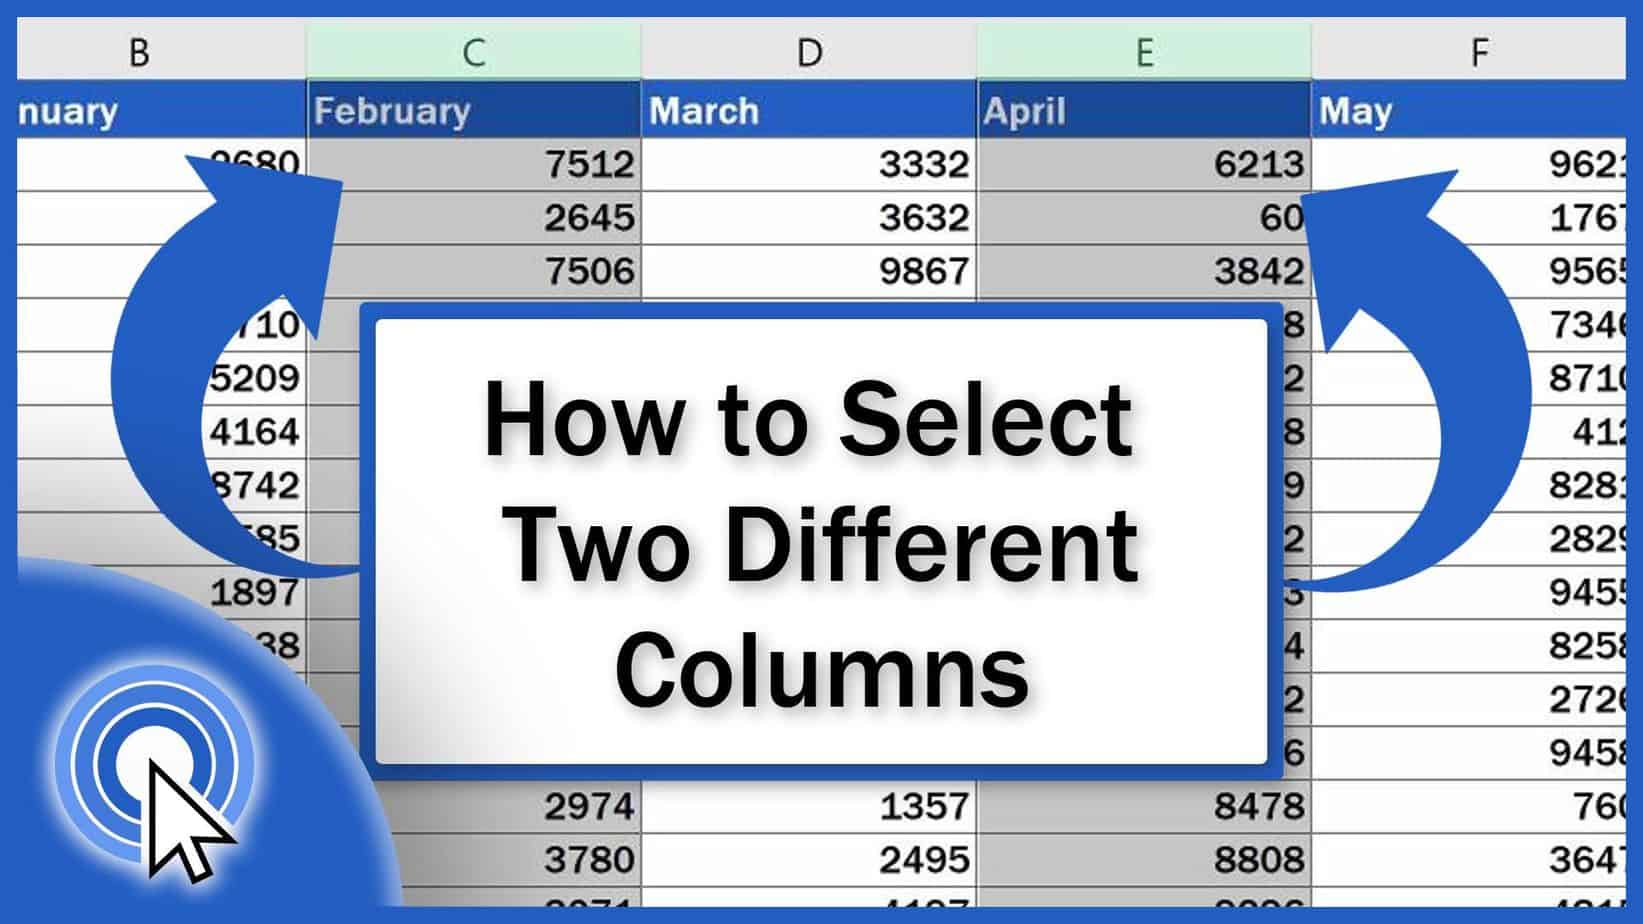 How to Select Two Different Columns in Excel at the Same Time